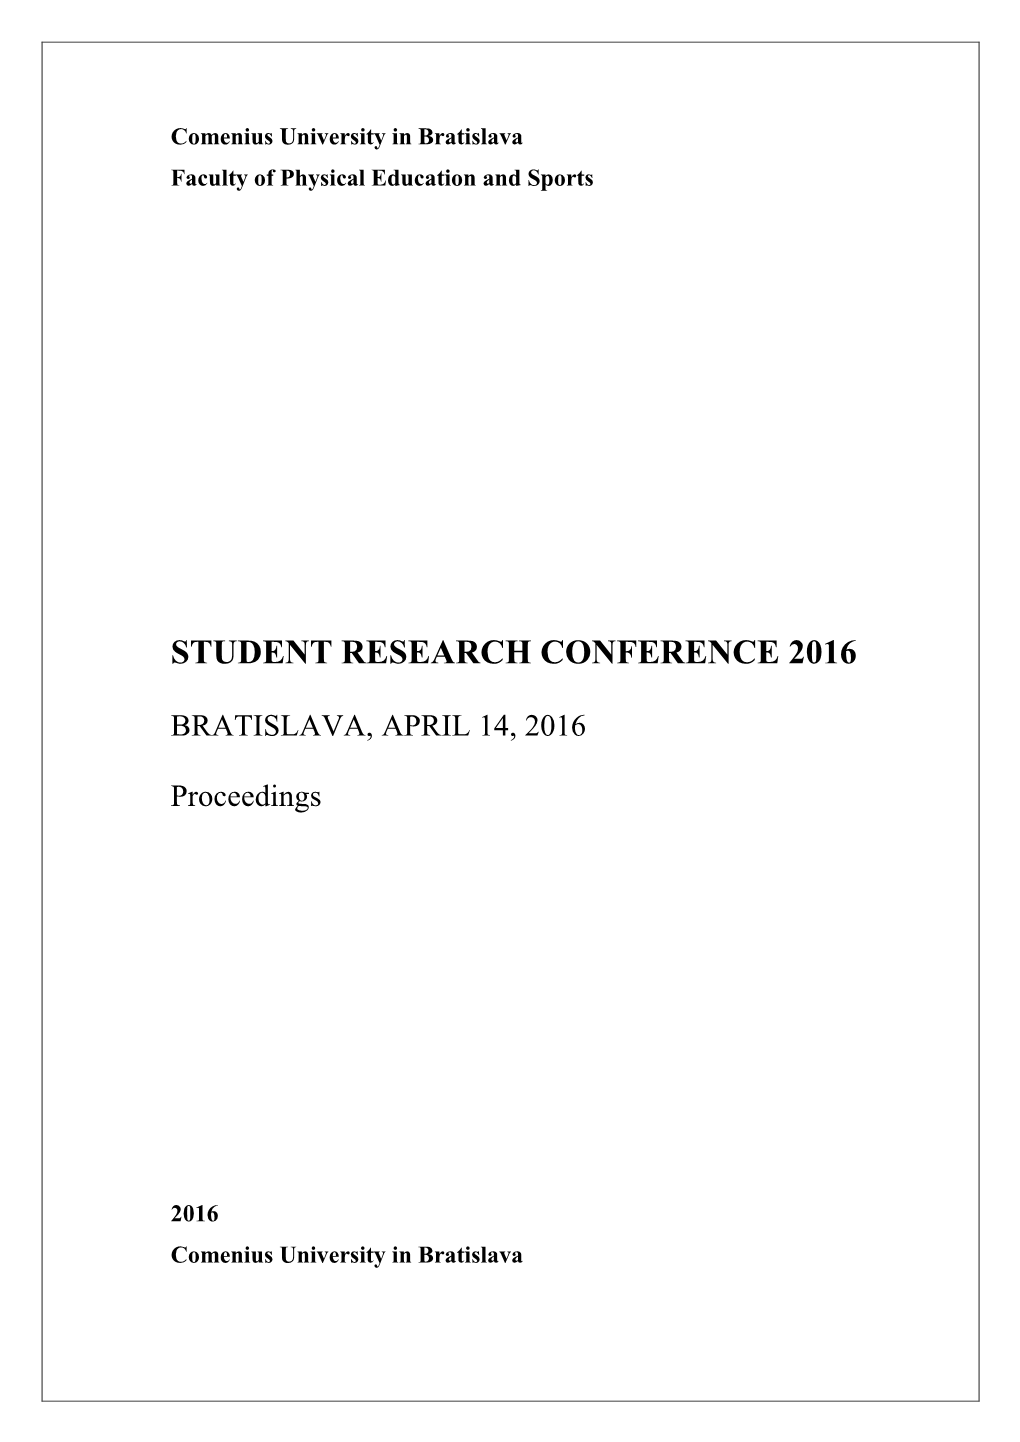 Student Research Conference 2016